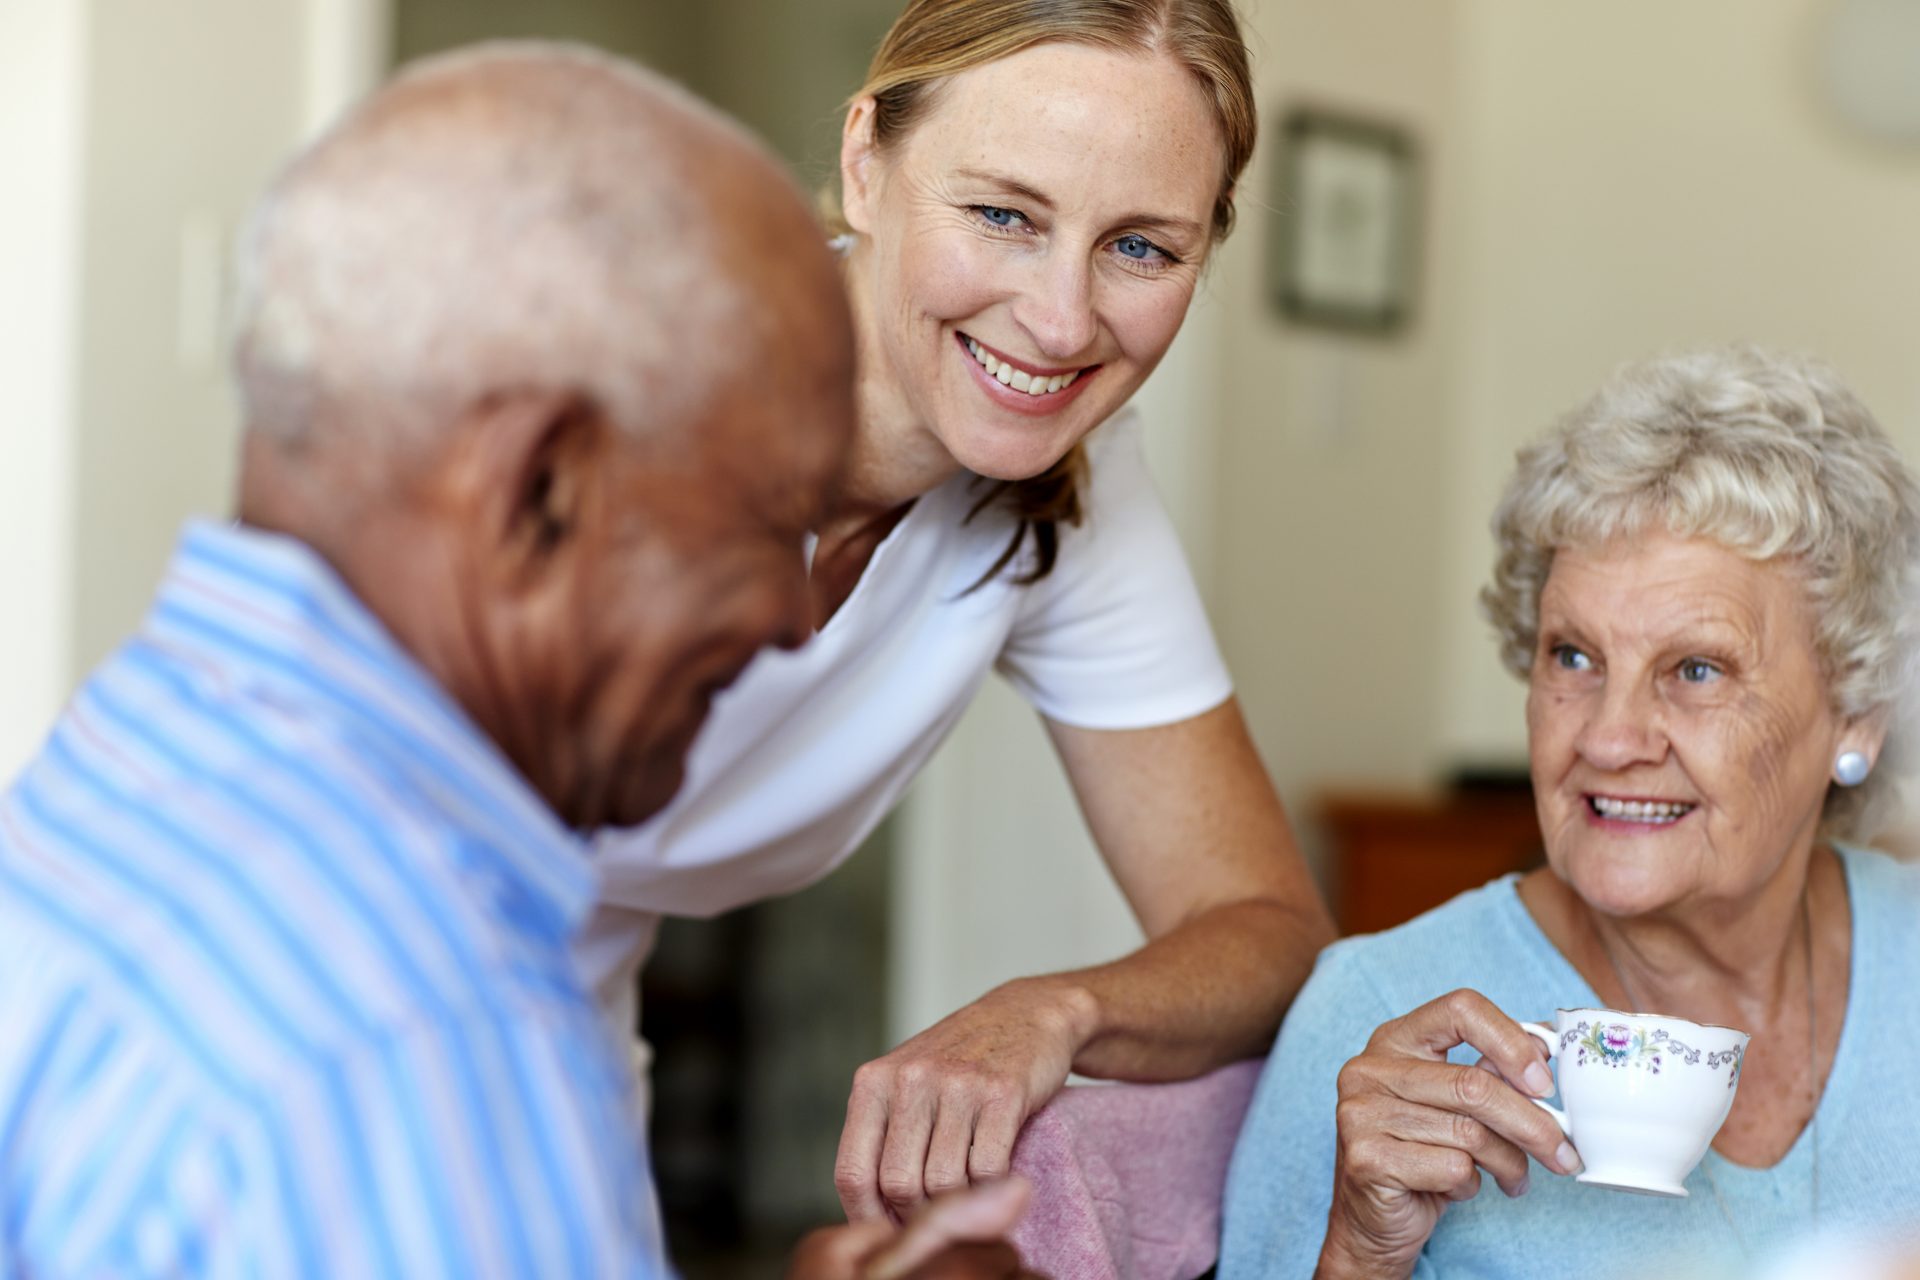 Caregiver laughing with elderly residents; one holding a teacup, the other engaged in conversation.